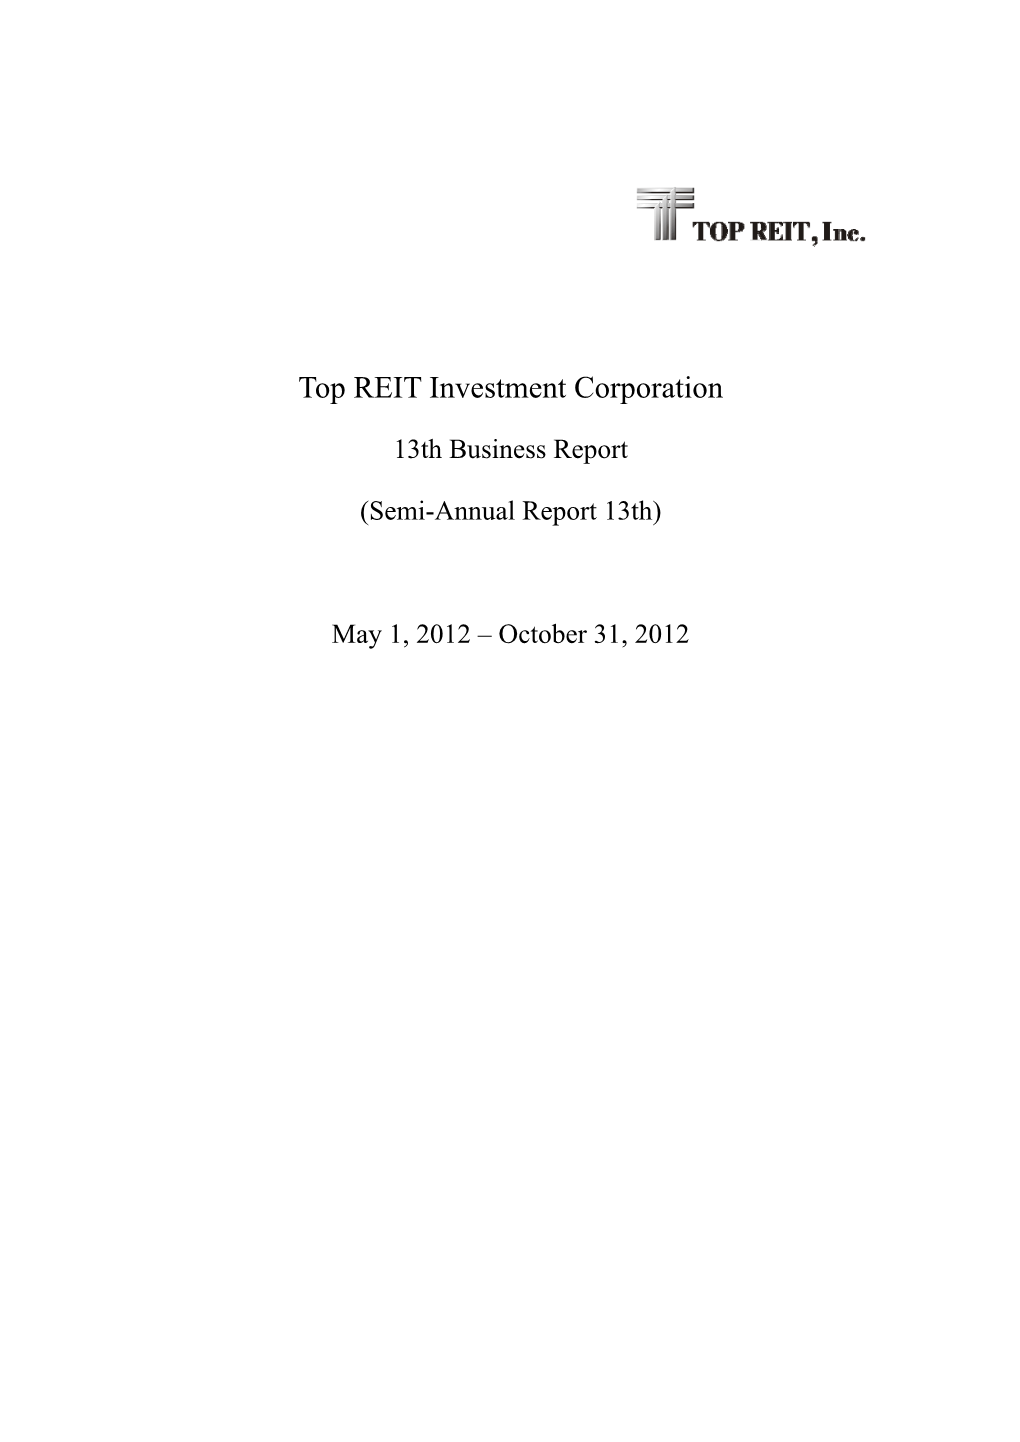 Top REIT Investment Corporation